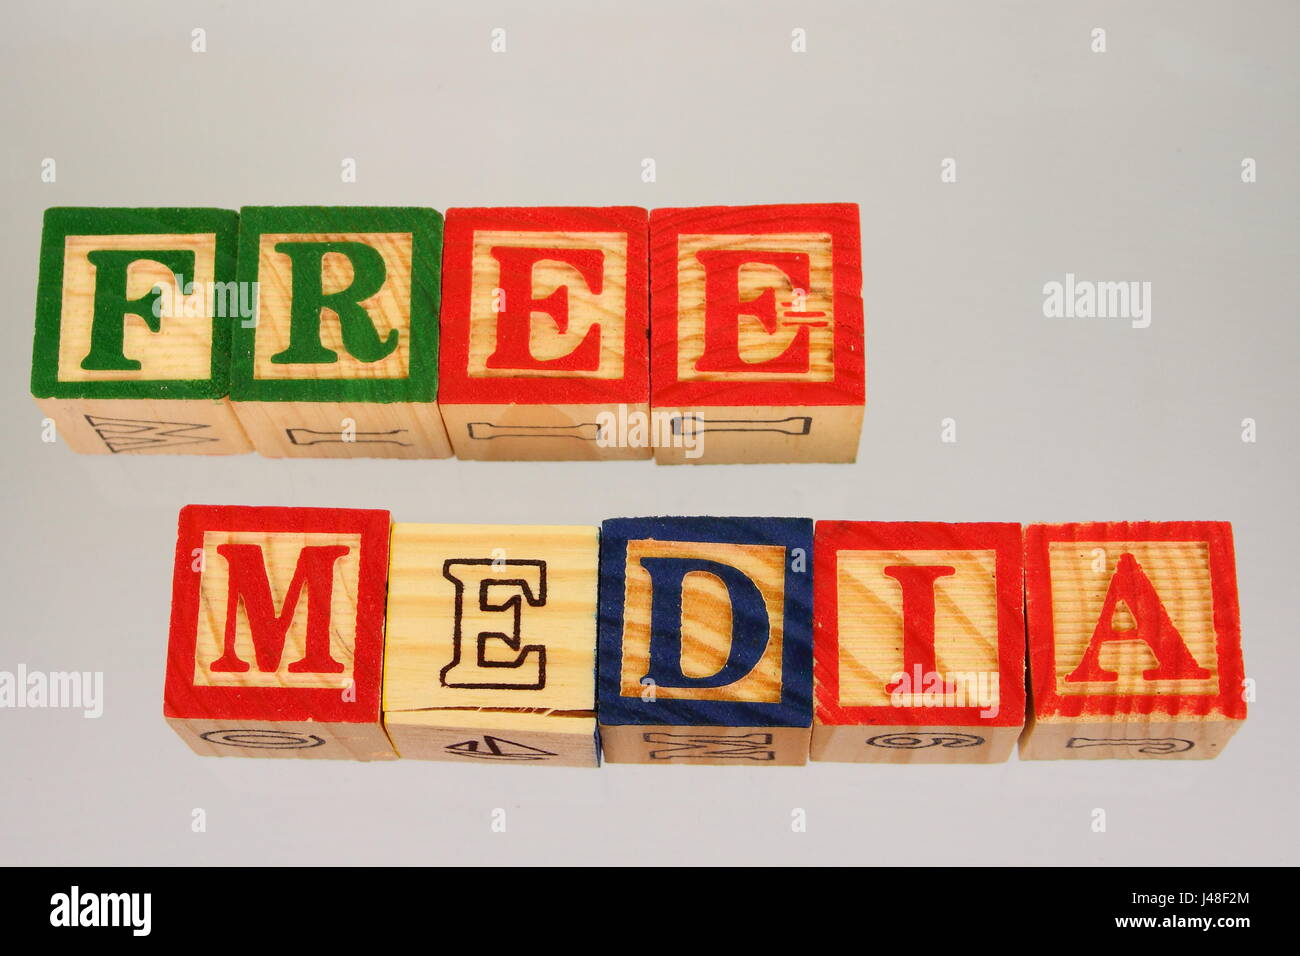 The phrase free media displayed visually on a white background using colorful wooden blocks Stock Photo